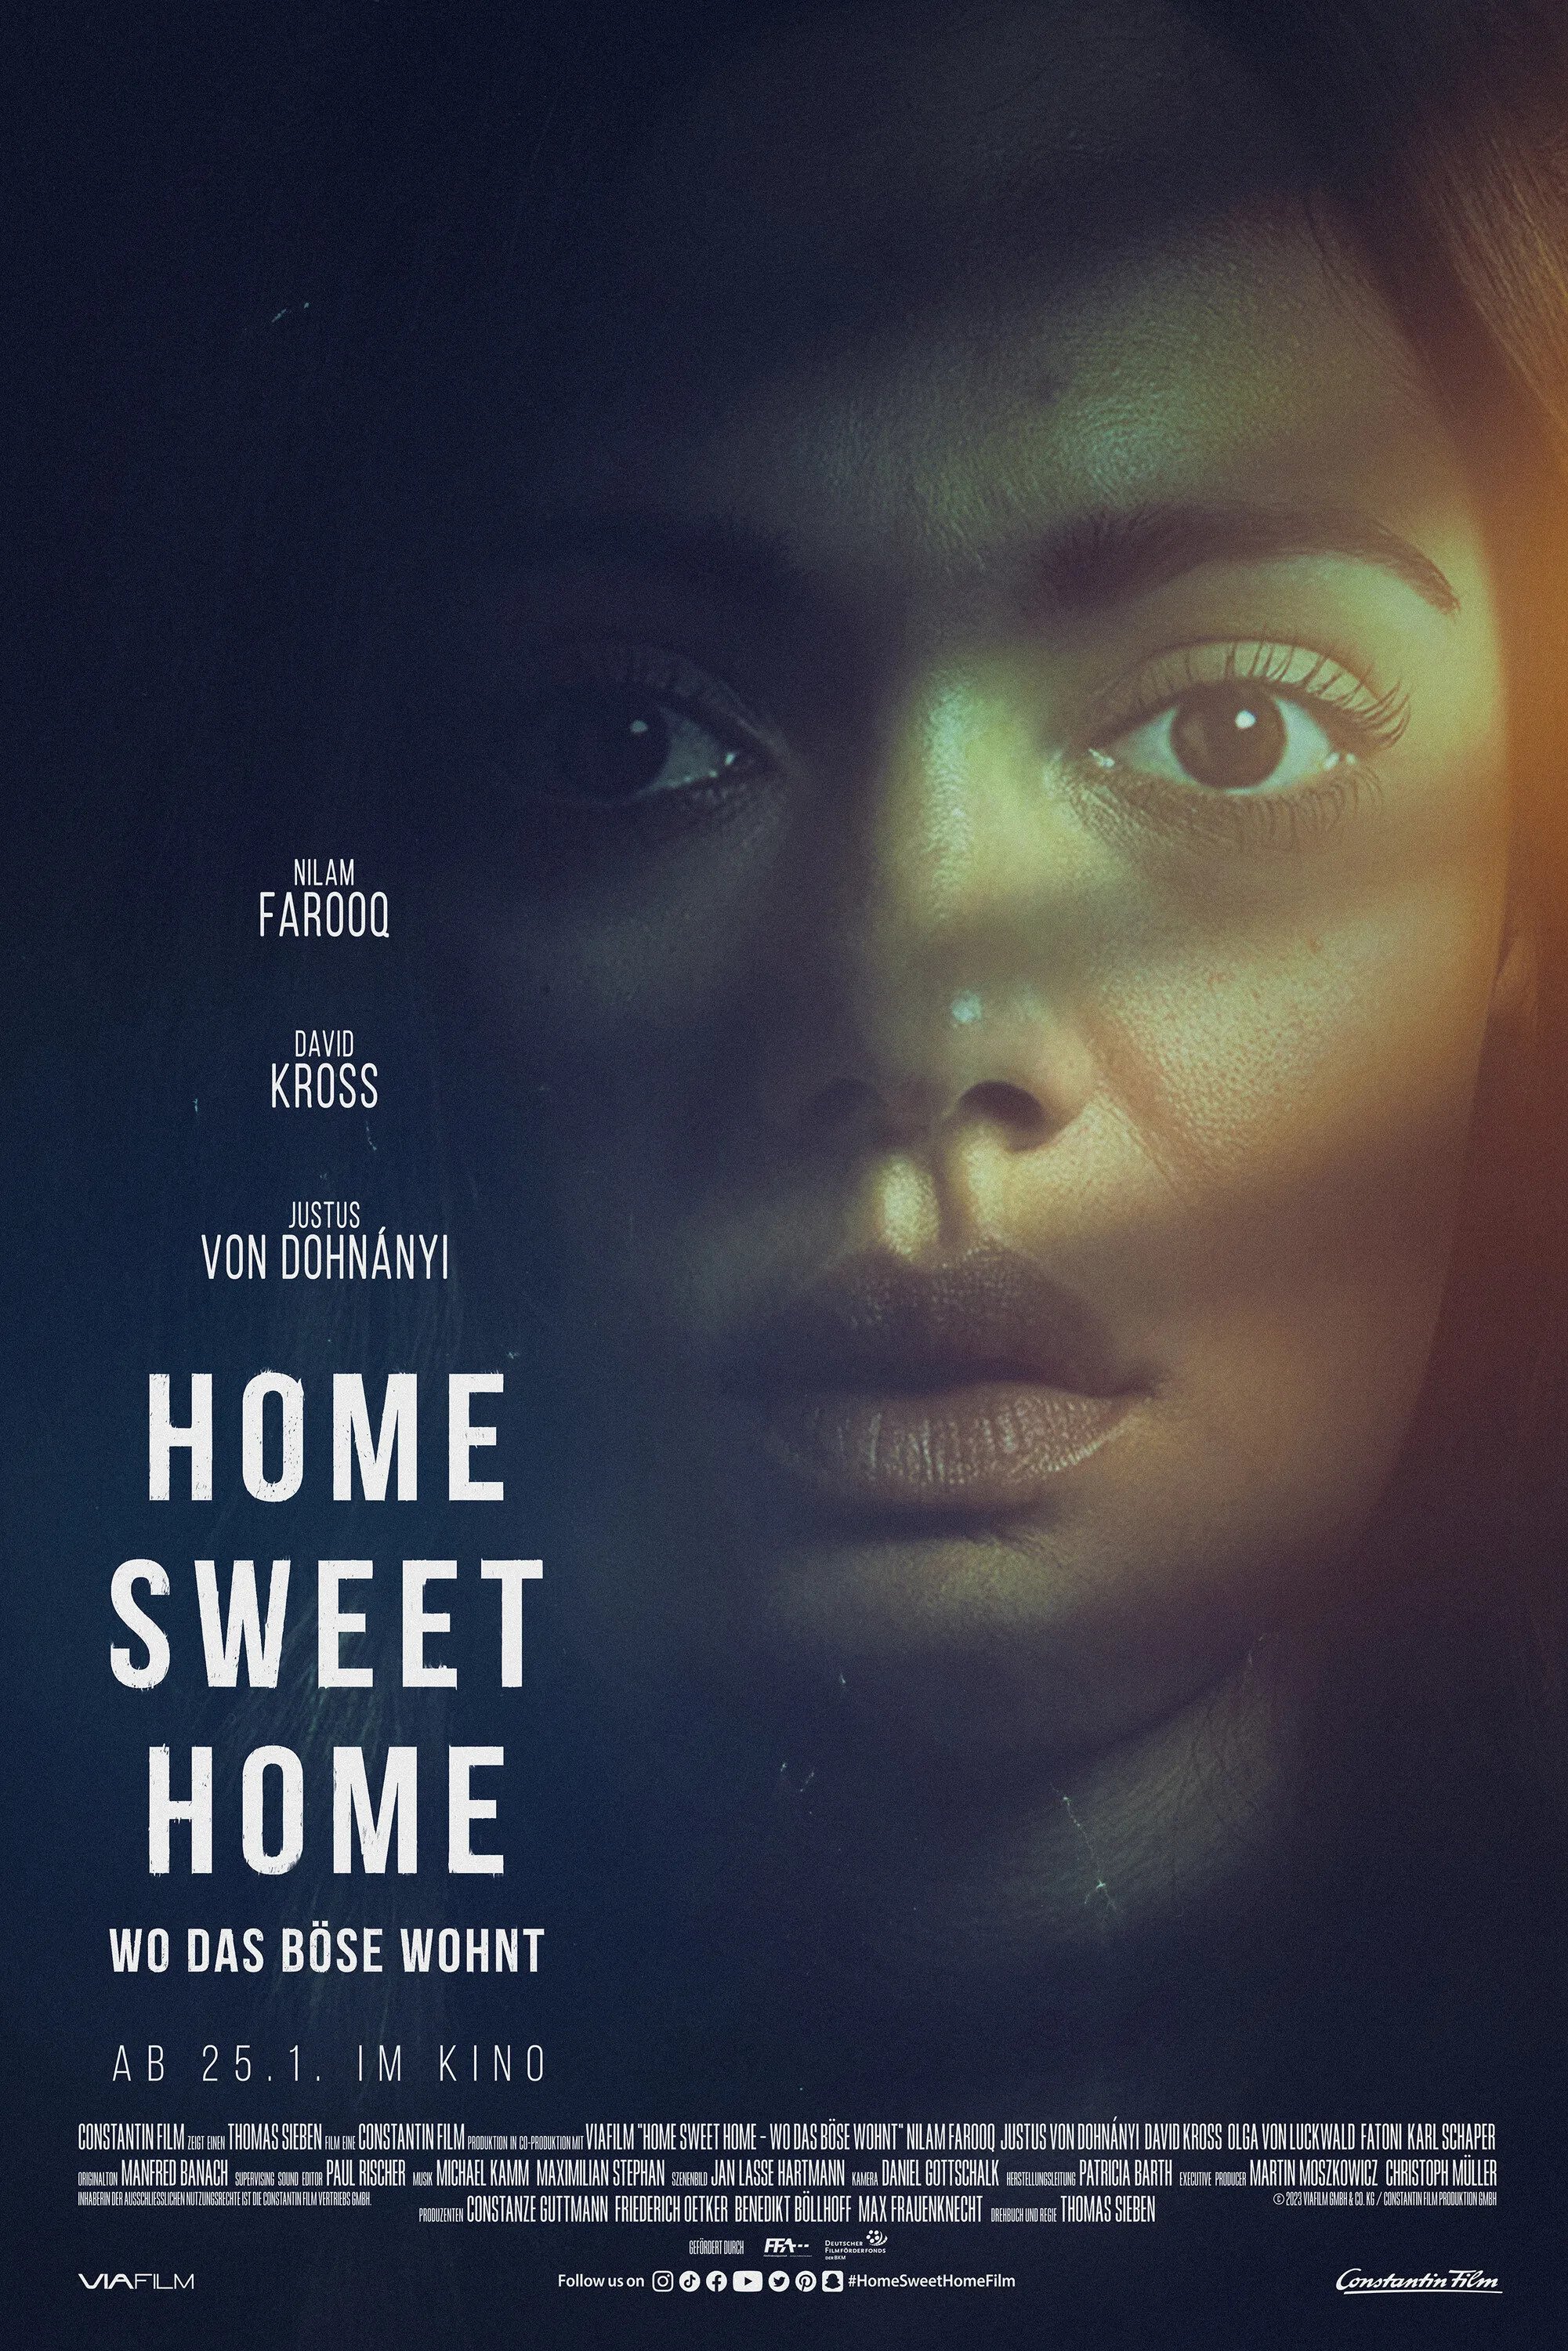 Home Sweet Home Trailer & Poster